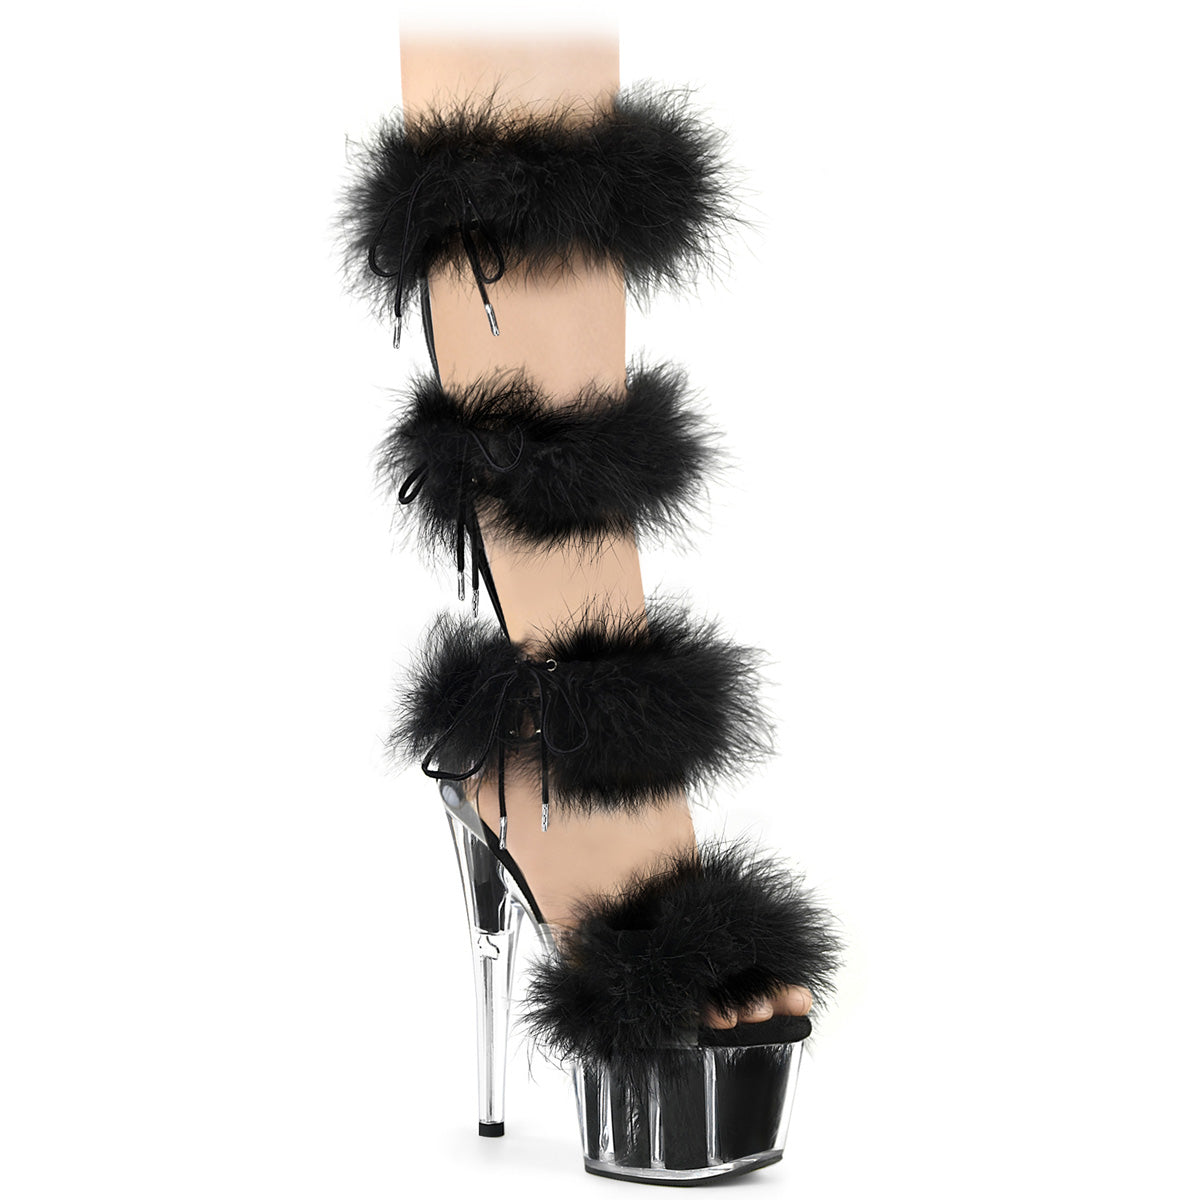 A model's leg and foot wearing the black Adore Marabou Knee High Sandals with Back Zip.